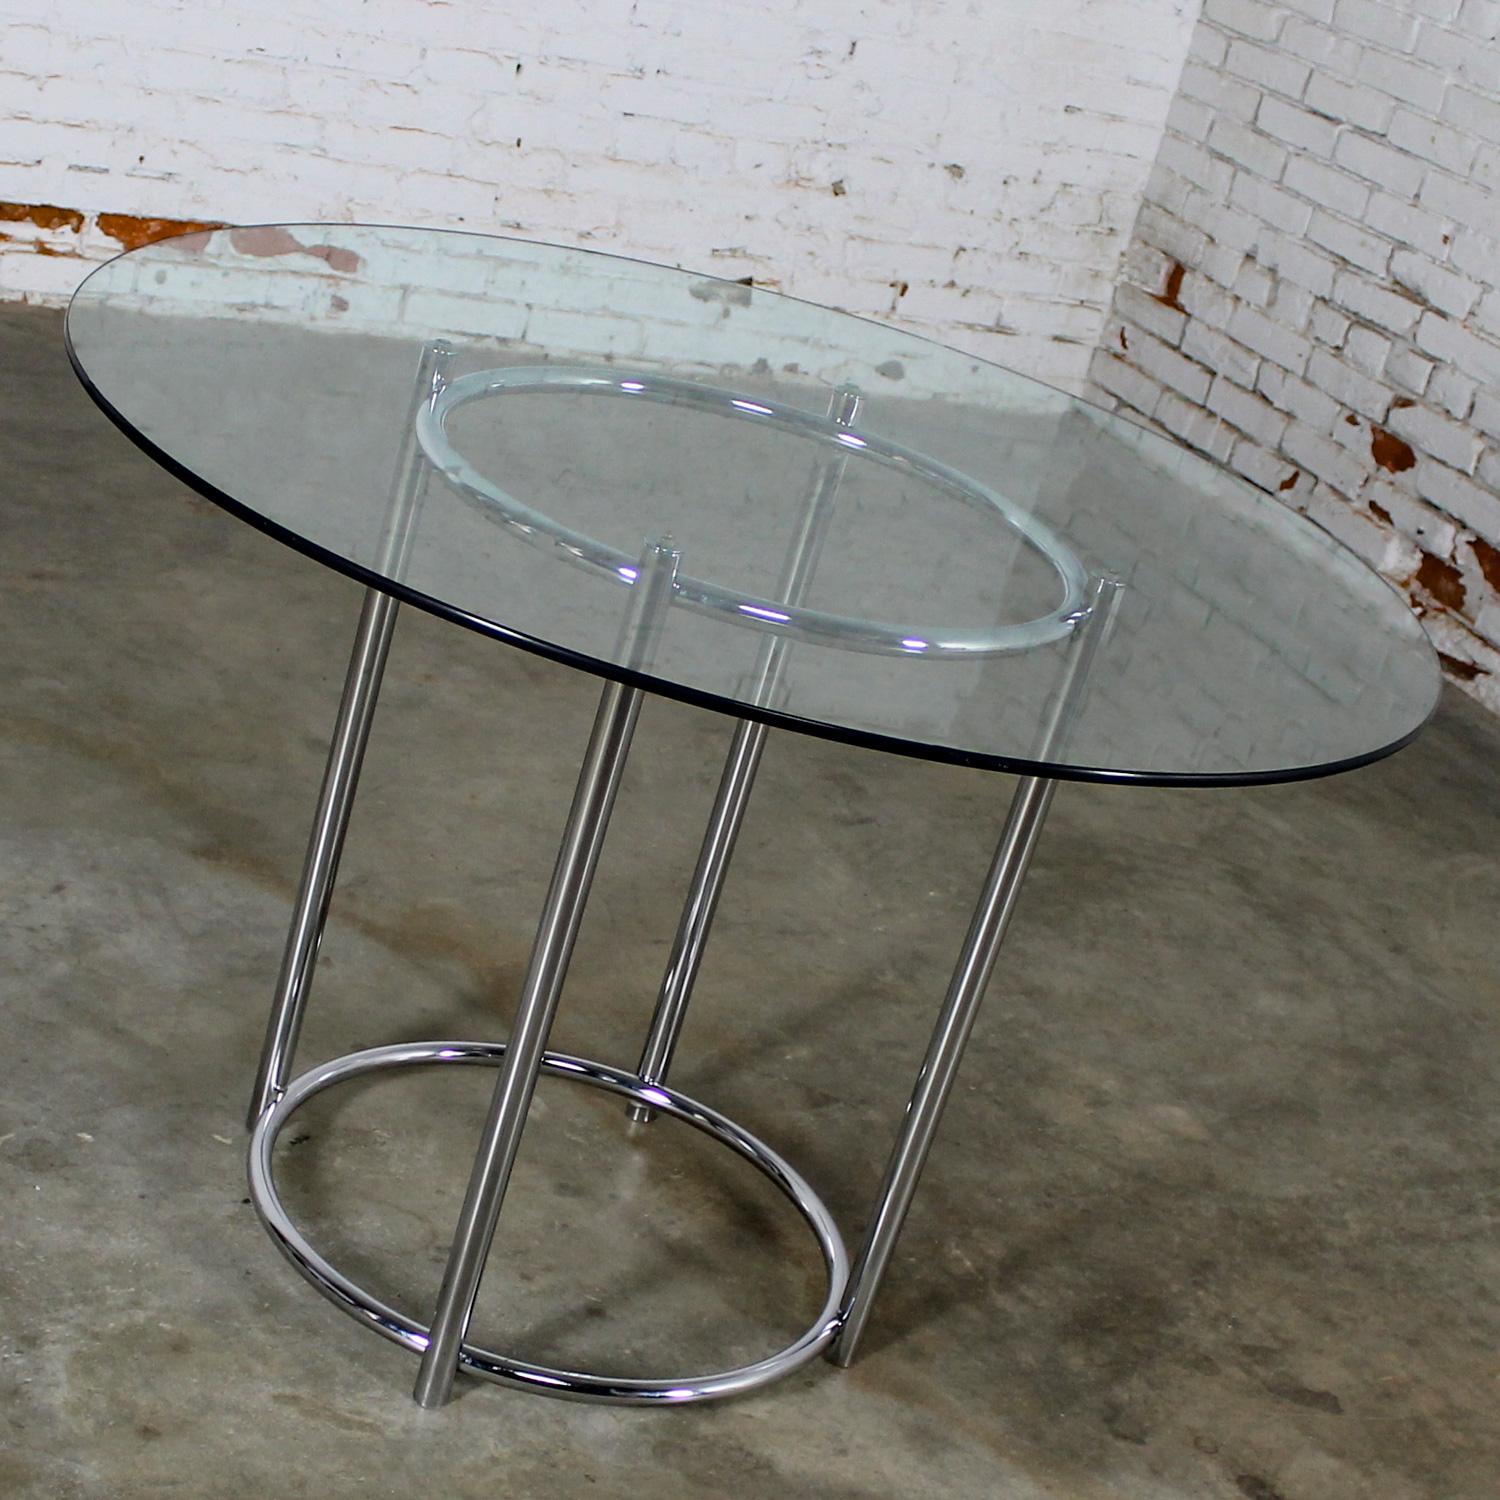 20th Century 1980’s Modern Daystrom Dinette or Dining Table Chrome Frame & Round Glass Top